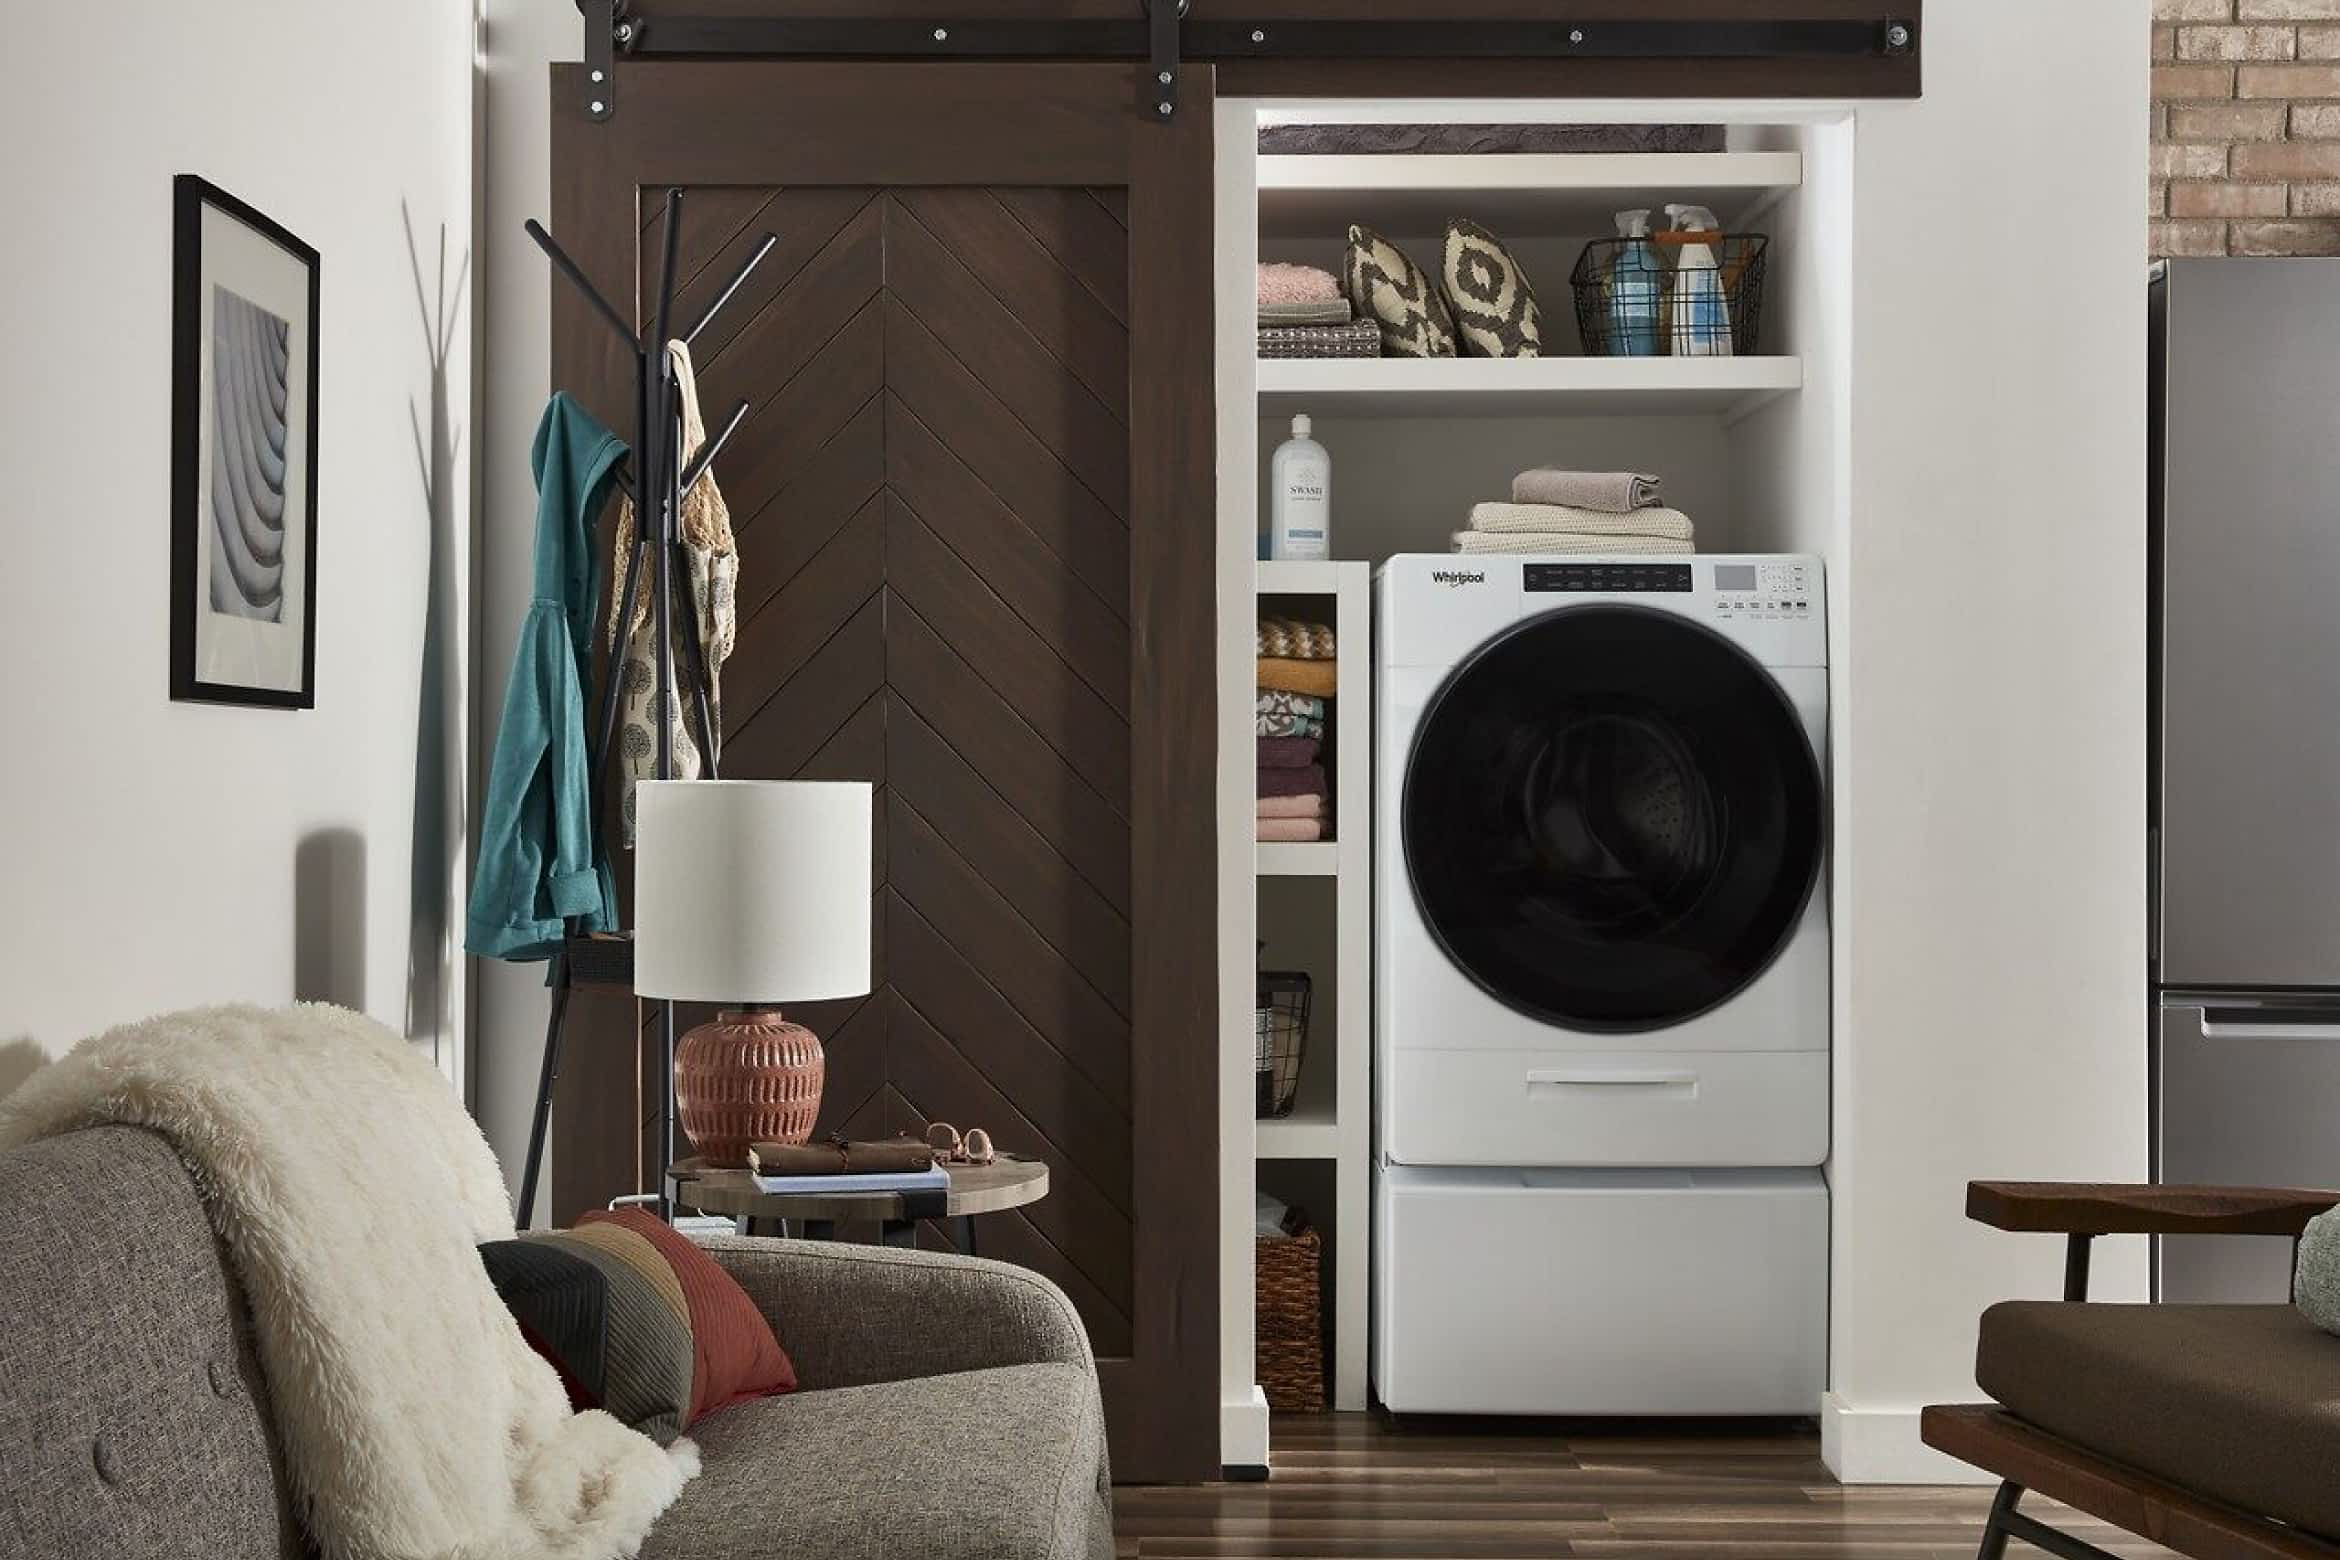 A Whirlpool® Front Load Washer on a Whirlpool® Laundry Pedestal